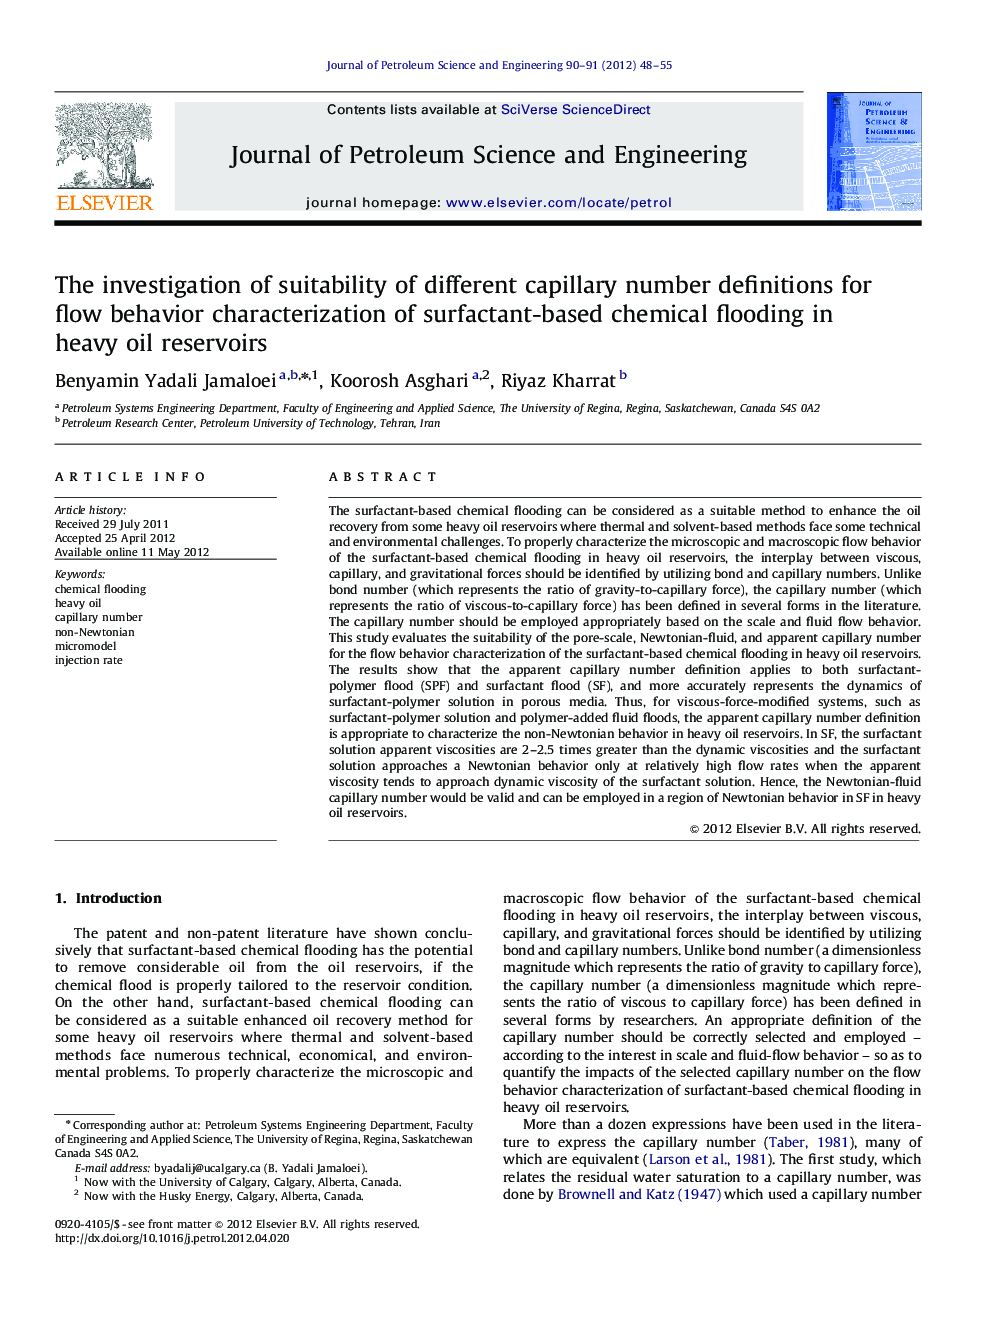 The investigation of suitability of different capillary number definitions for flow behavior characterization of surfactant-based chemical flooding in heavy oil reservoirs